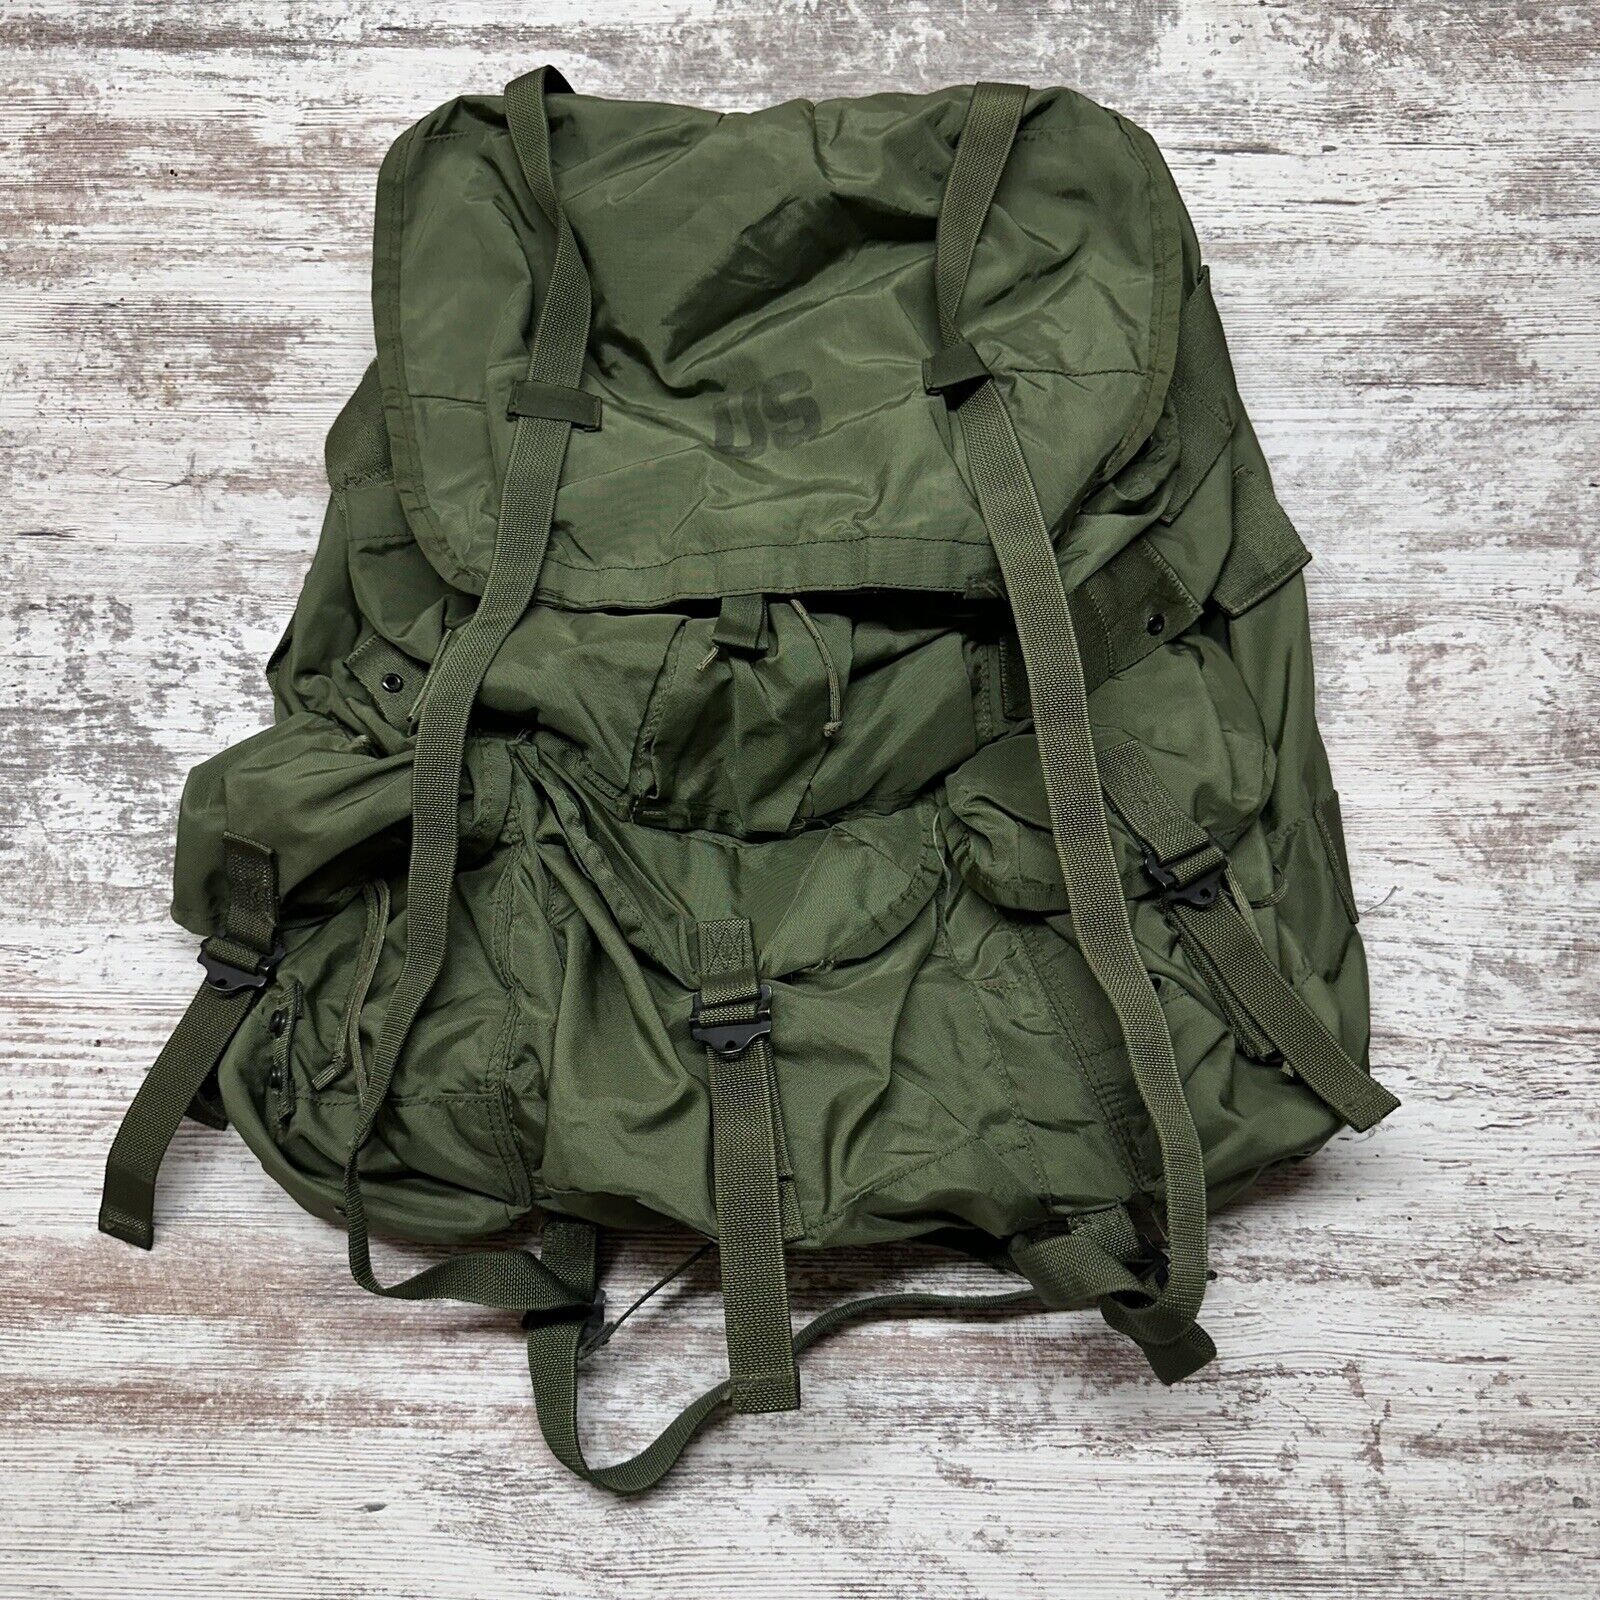 US ARMY Field Pack Military OD Green Alice LC-1 Large Combat Nylon No Frame